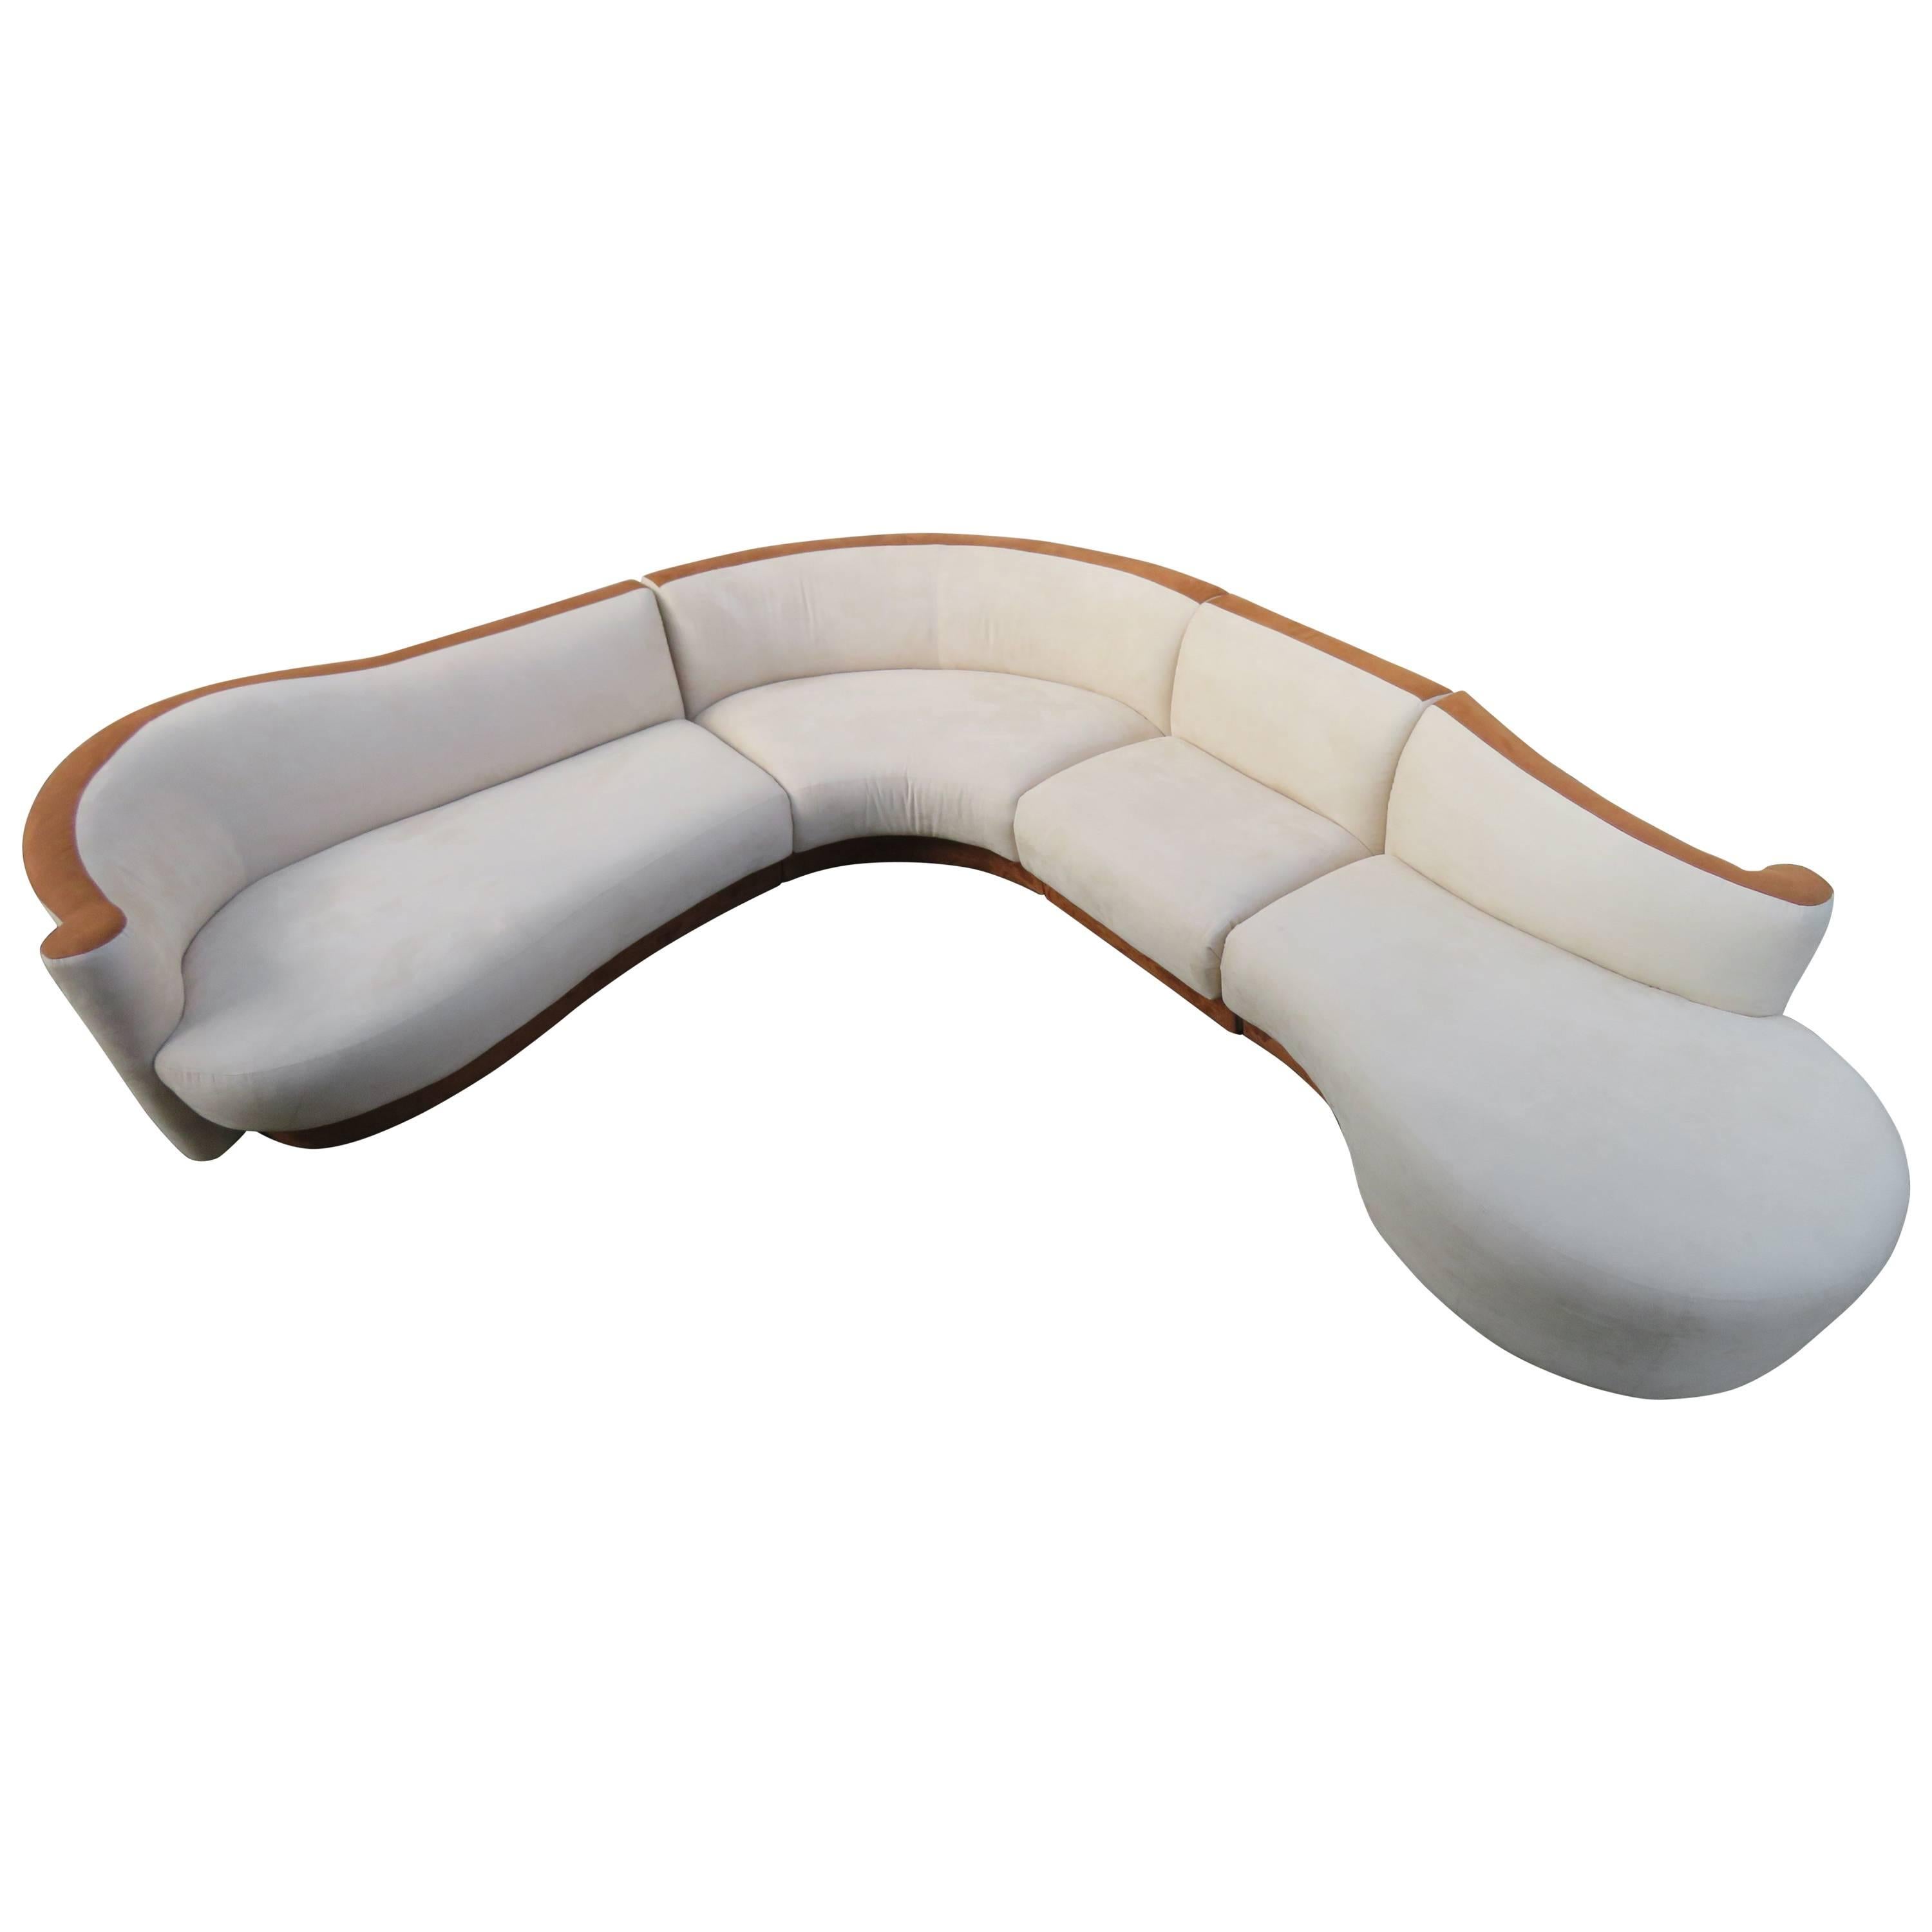 Four-Piece Curved Serpentine Sectional Sofa Weiman